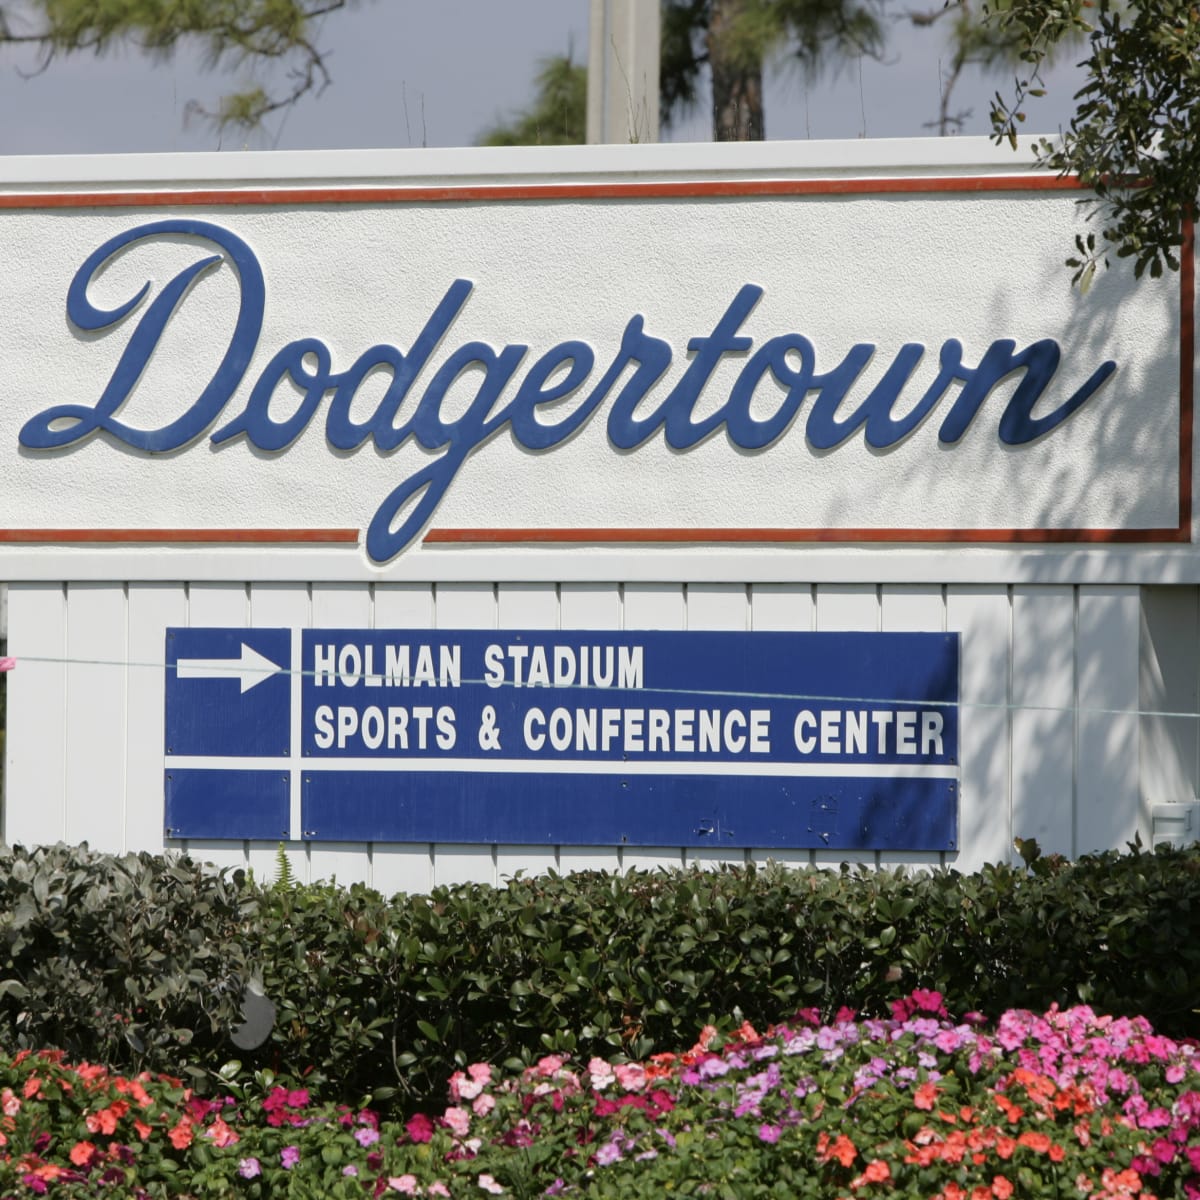 Dodgers welcome Sandy Koufax back to spring training